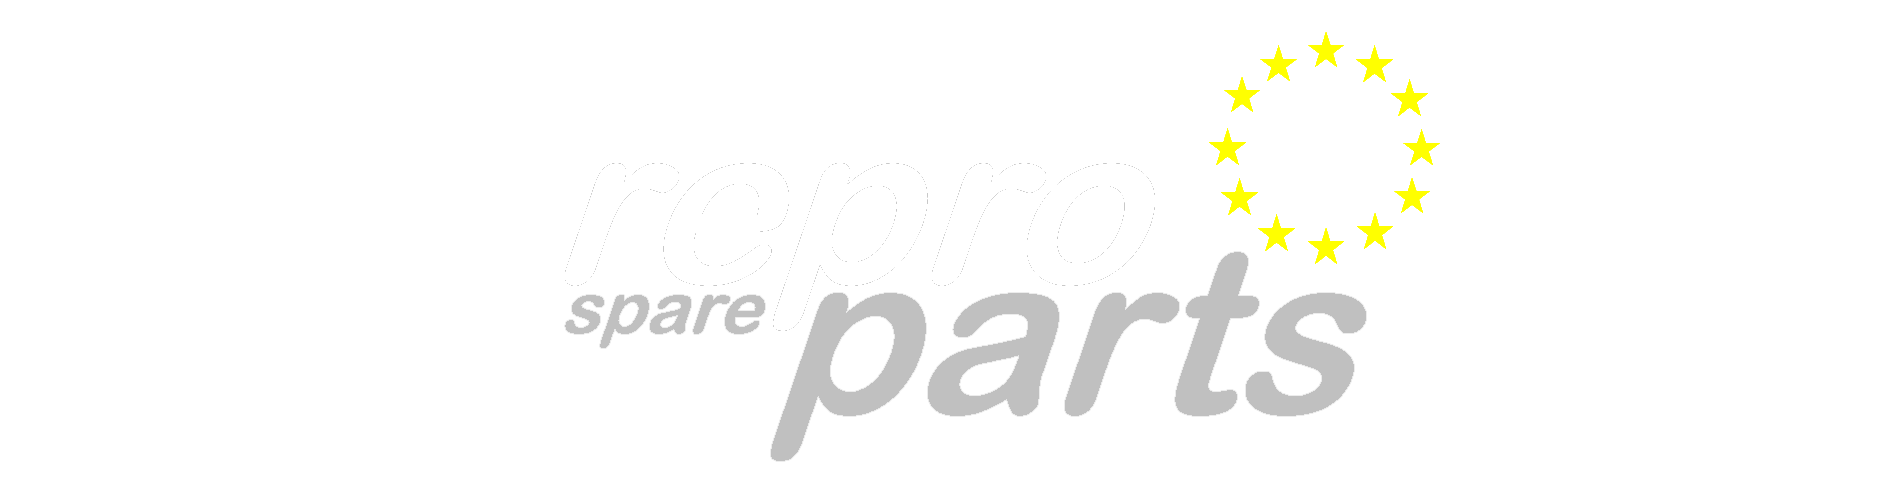 reproparts - spare parts for classic cars